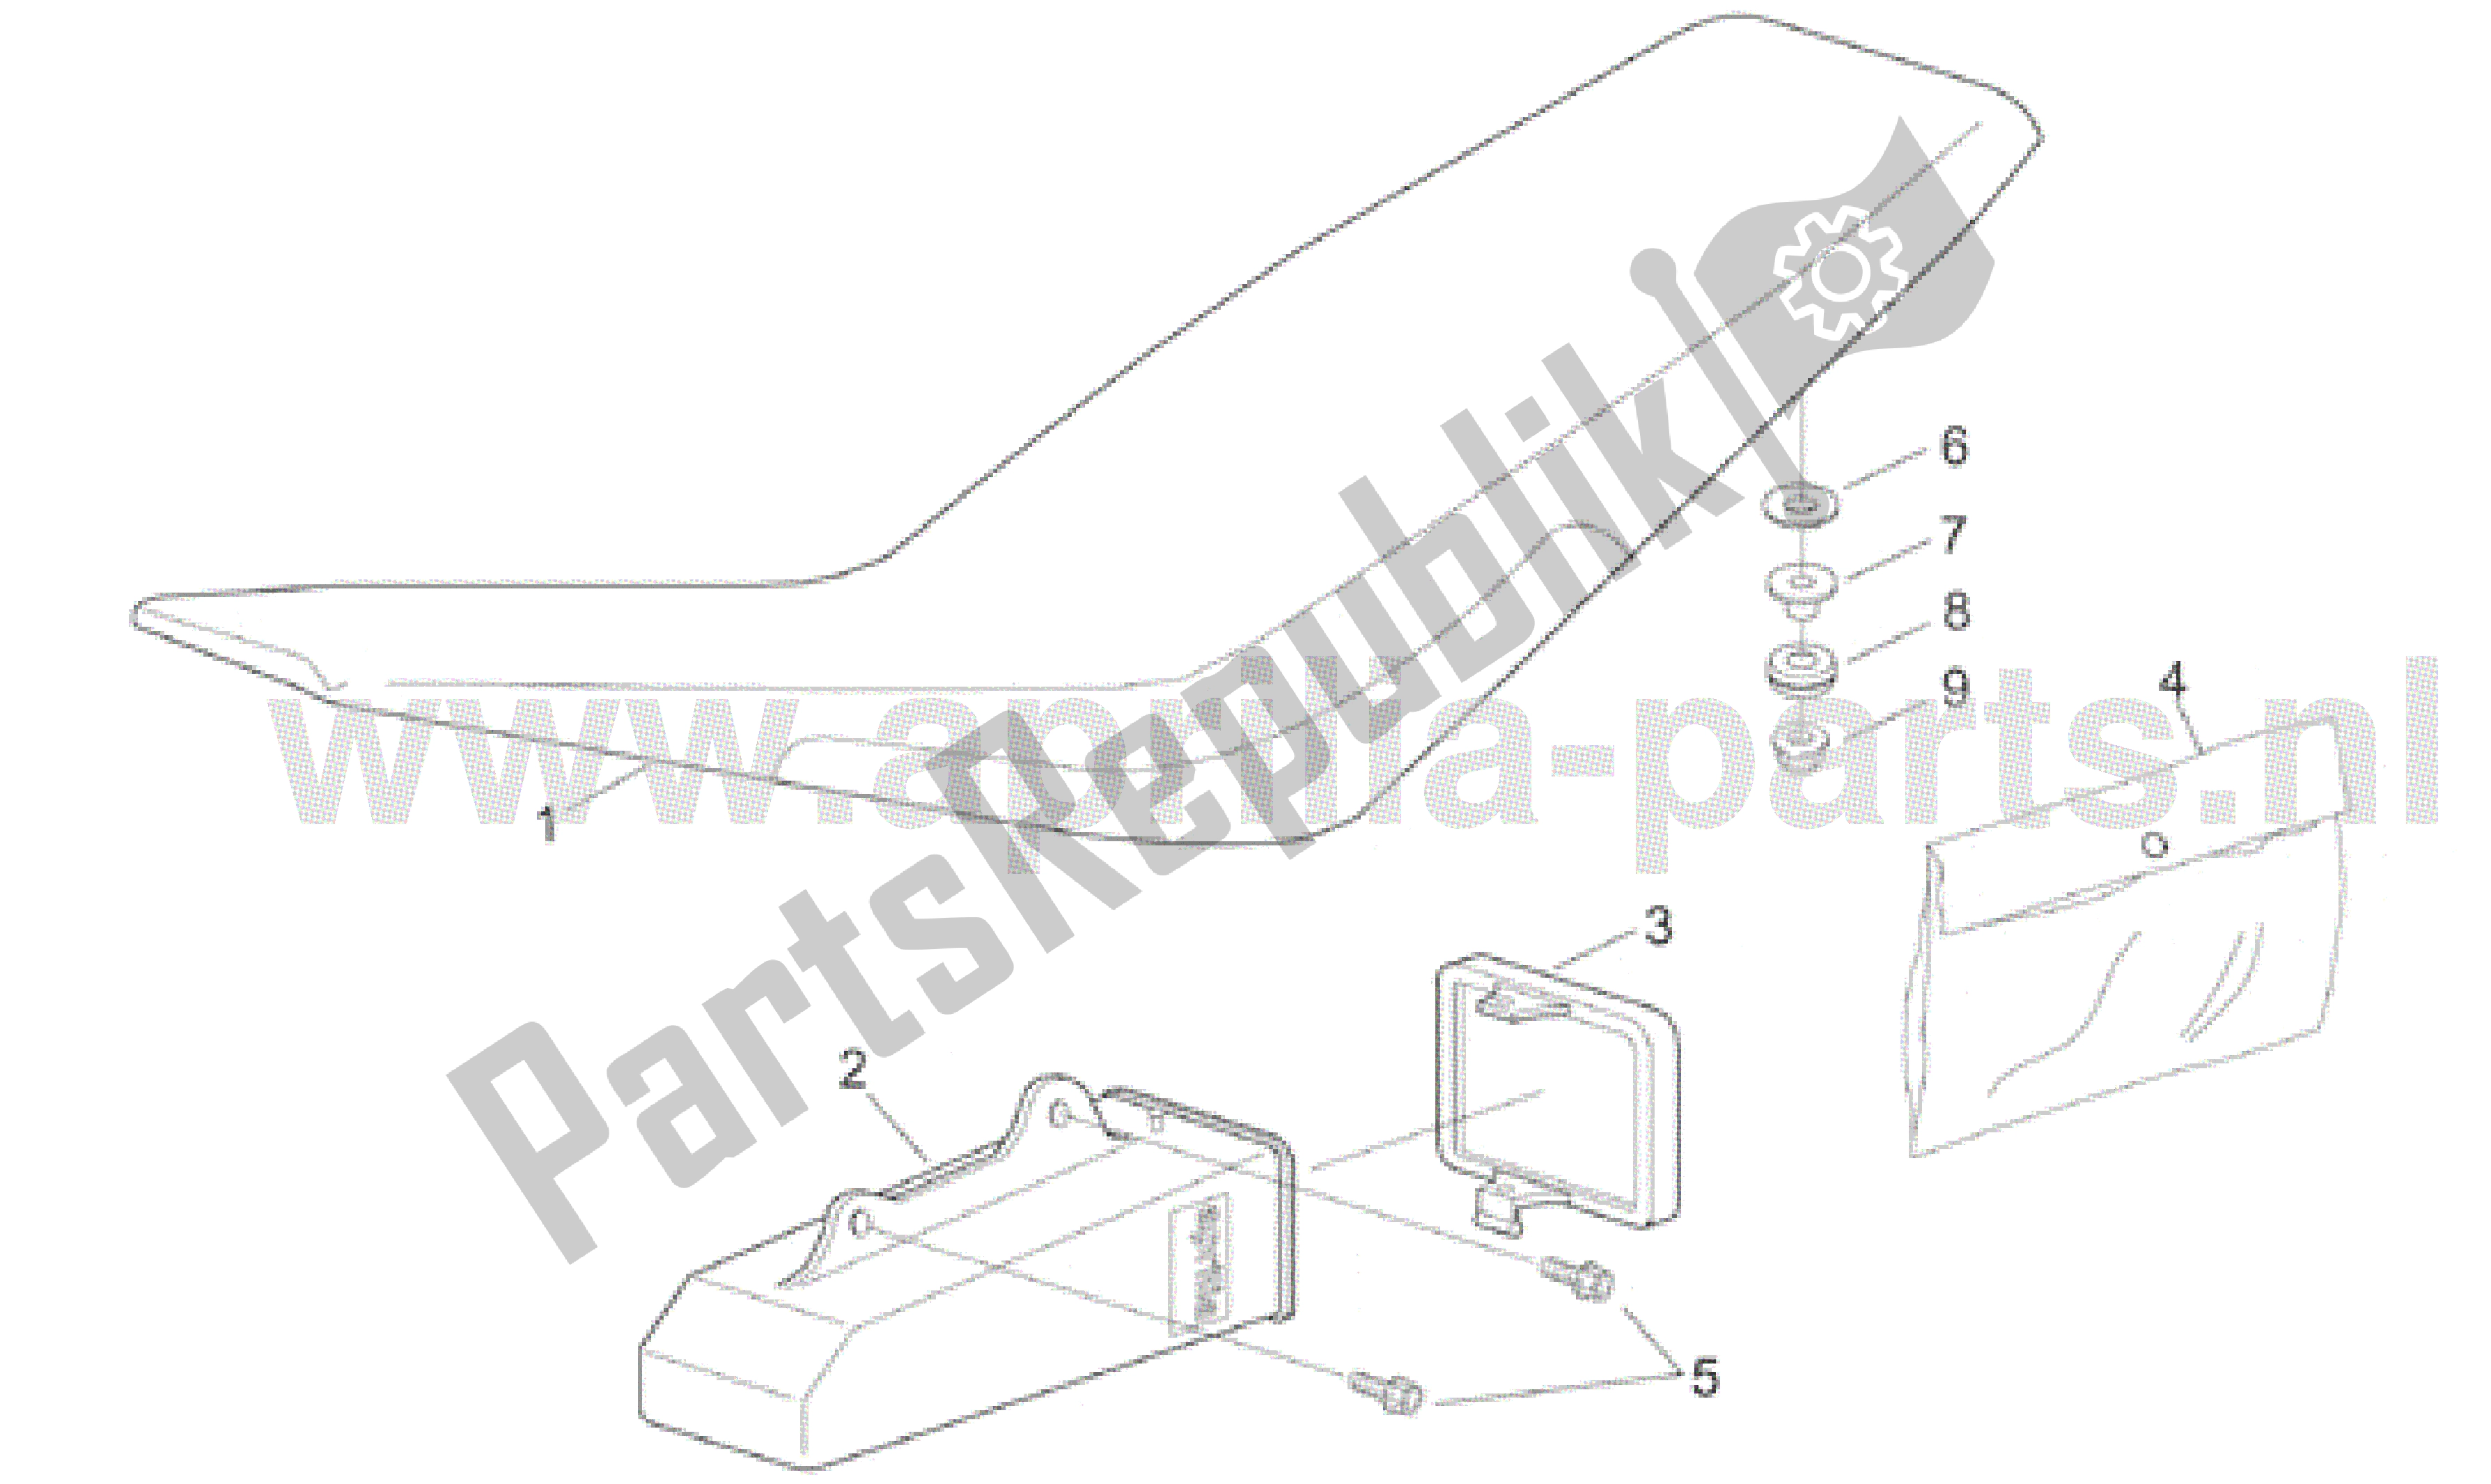 All parts for the Saddle of the Aprilia RX 50 1995 - 2000